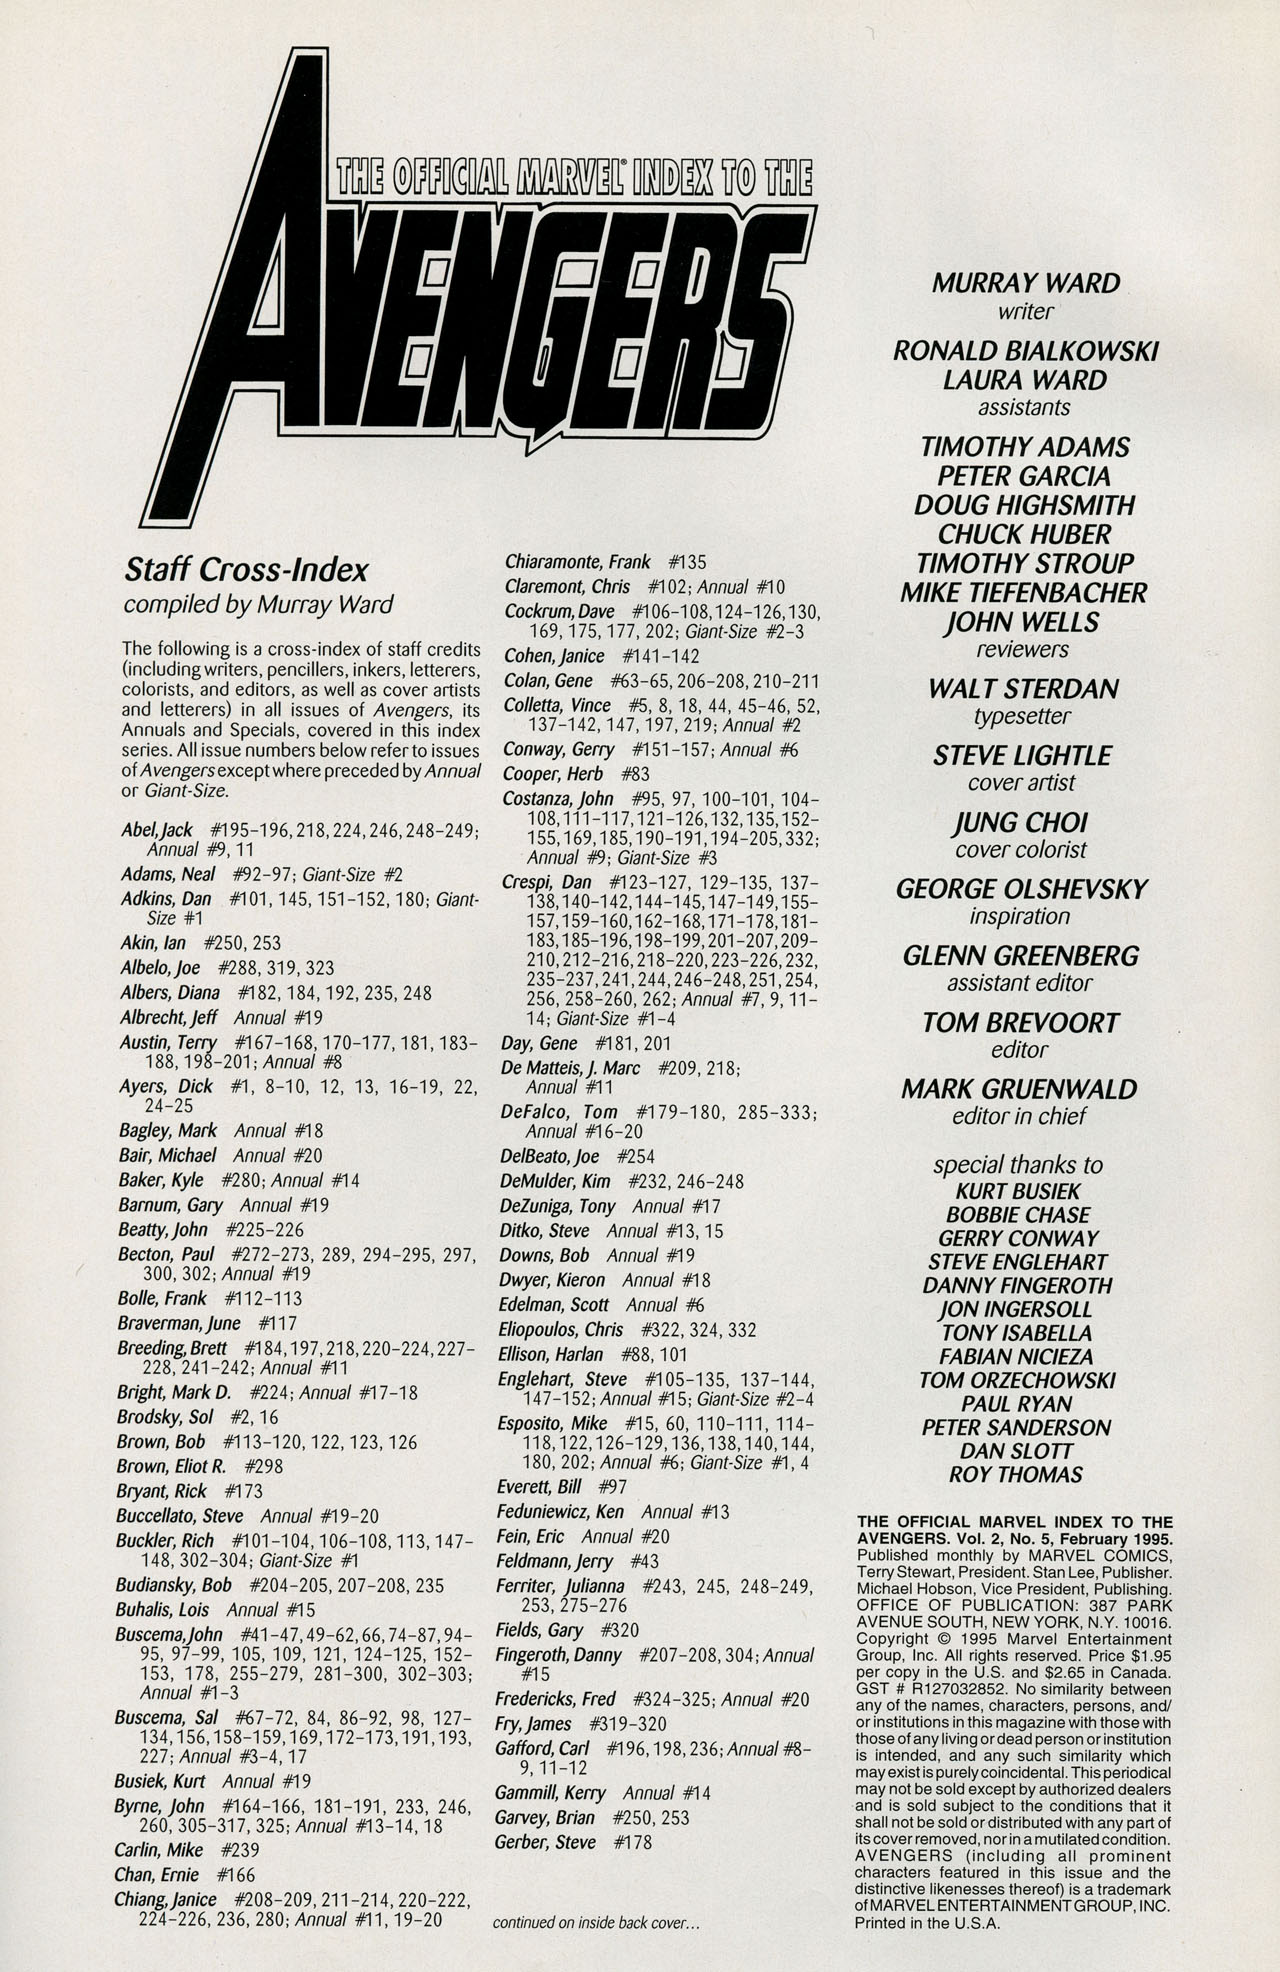 Read online The Official Marvel Index to the Avengers comic -  Issue #5 - 2